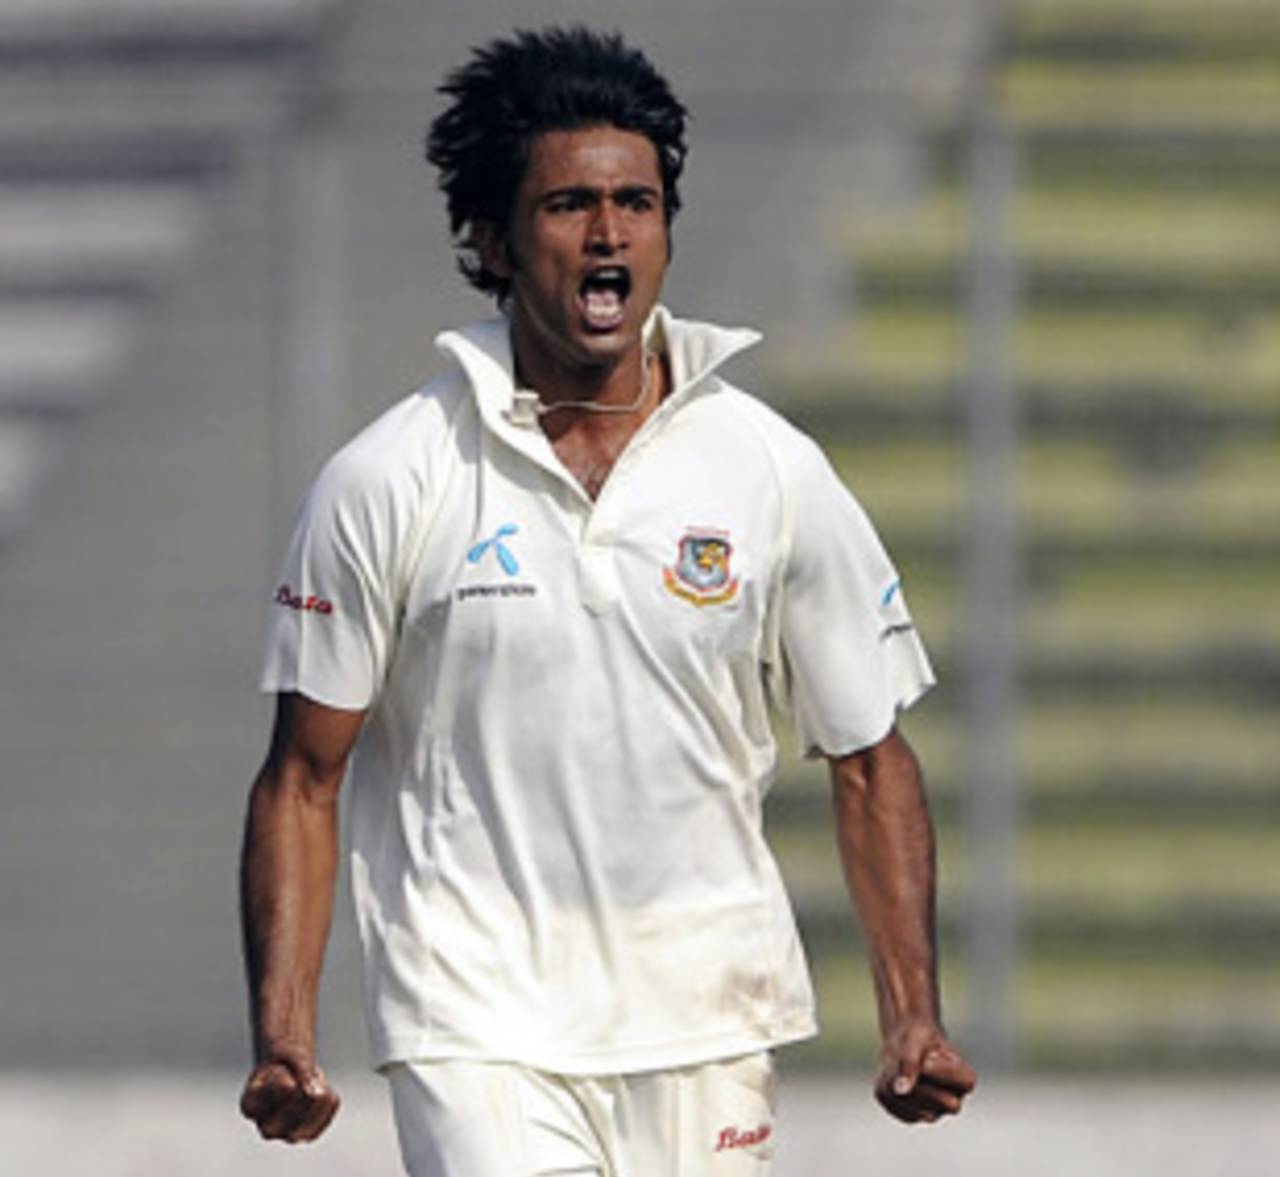 Shahadat Hossain lets go after getting rid of Virender Sehwag, Bangladesh v India, 2nd Test, Mirpur, 2nd day, January 25, 2010